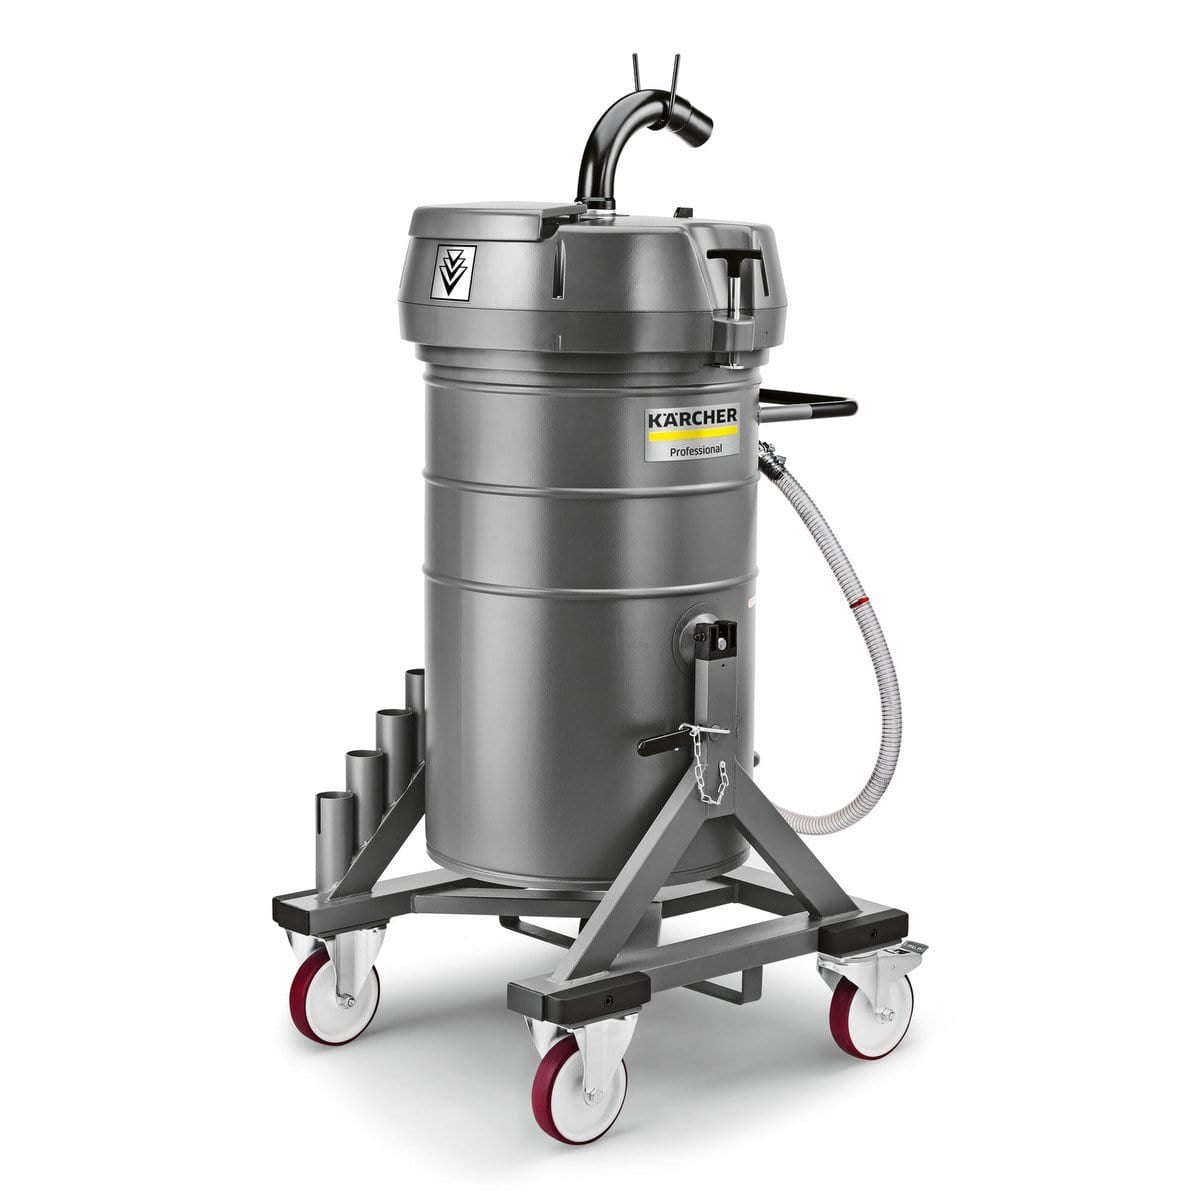 Karcher 120L Industrial Vacuum Cleaner - IVR-L 120/24-2 Tc | Supply Master | Accra, Ghana Tools Building Steel Engineering Hardware tool